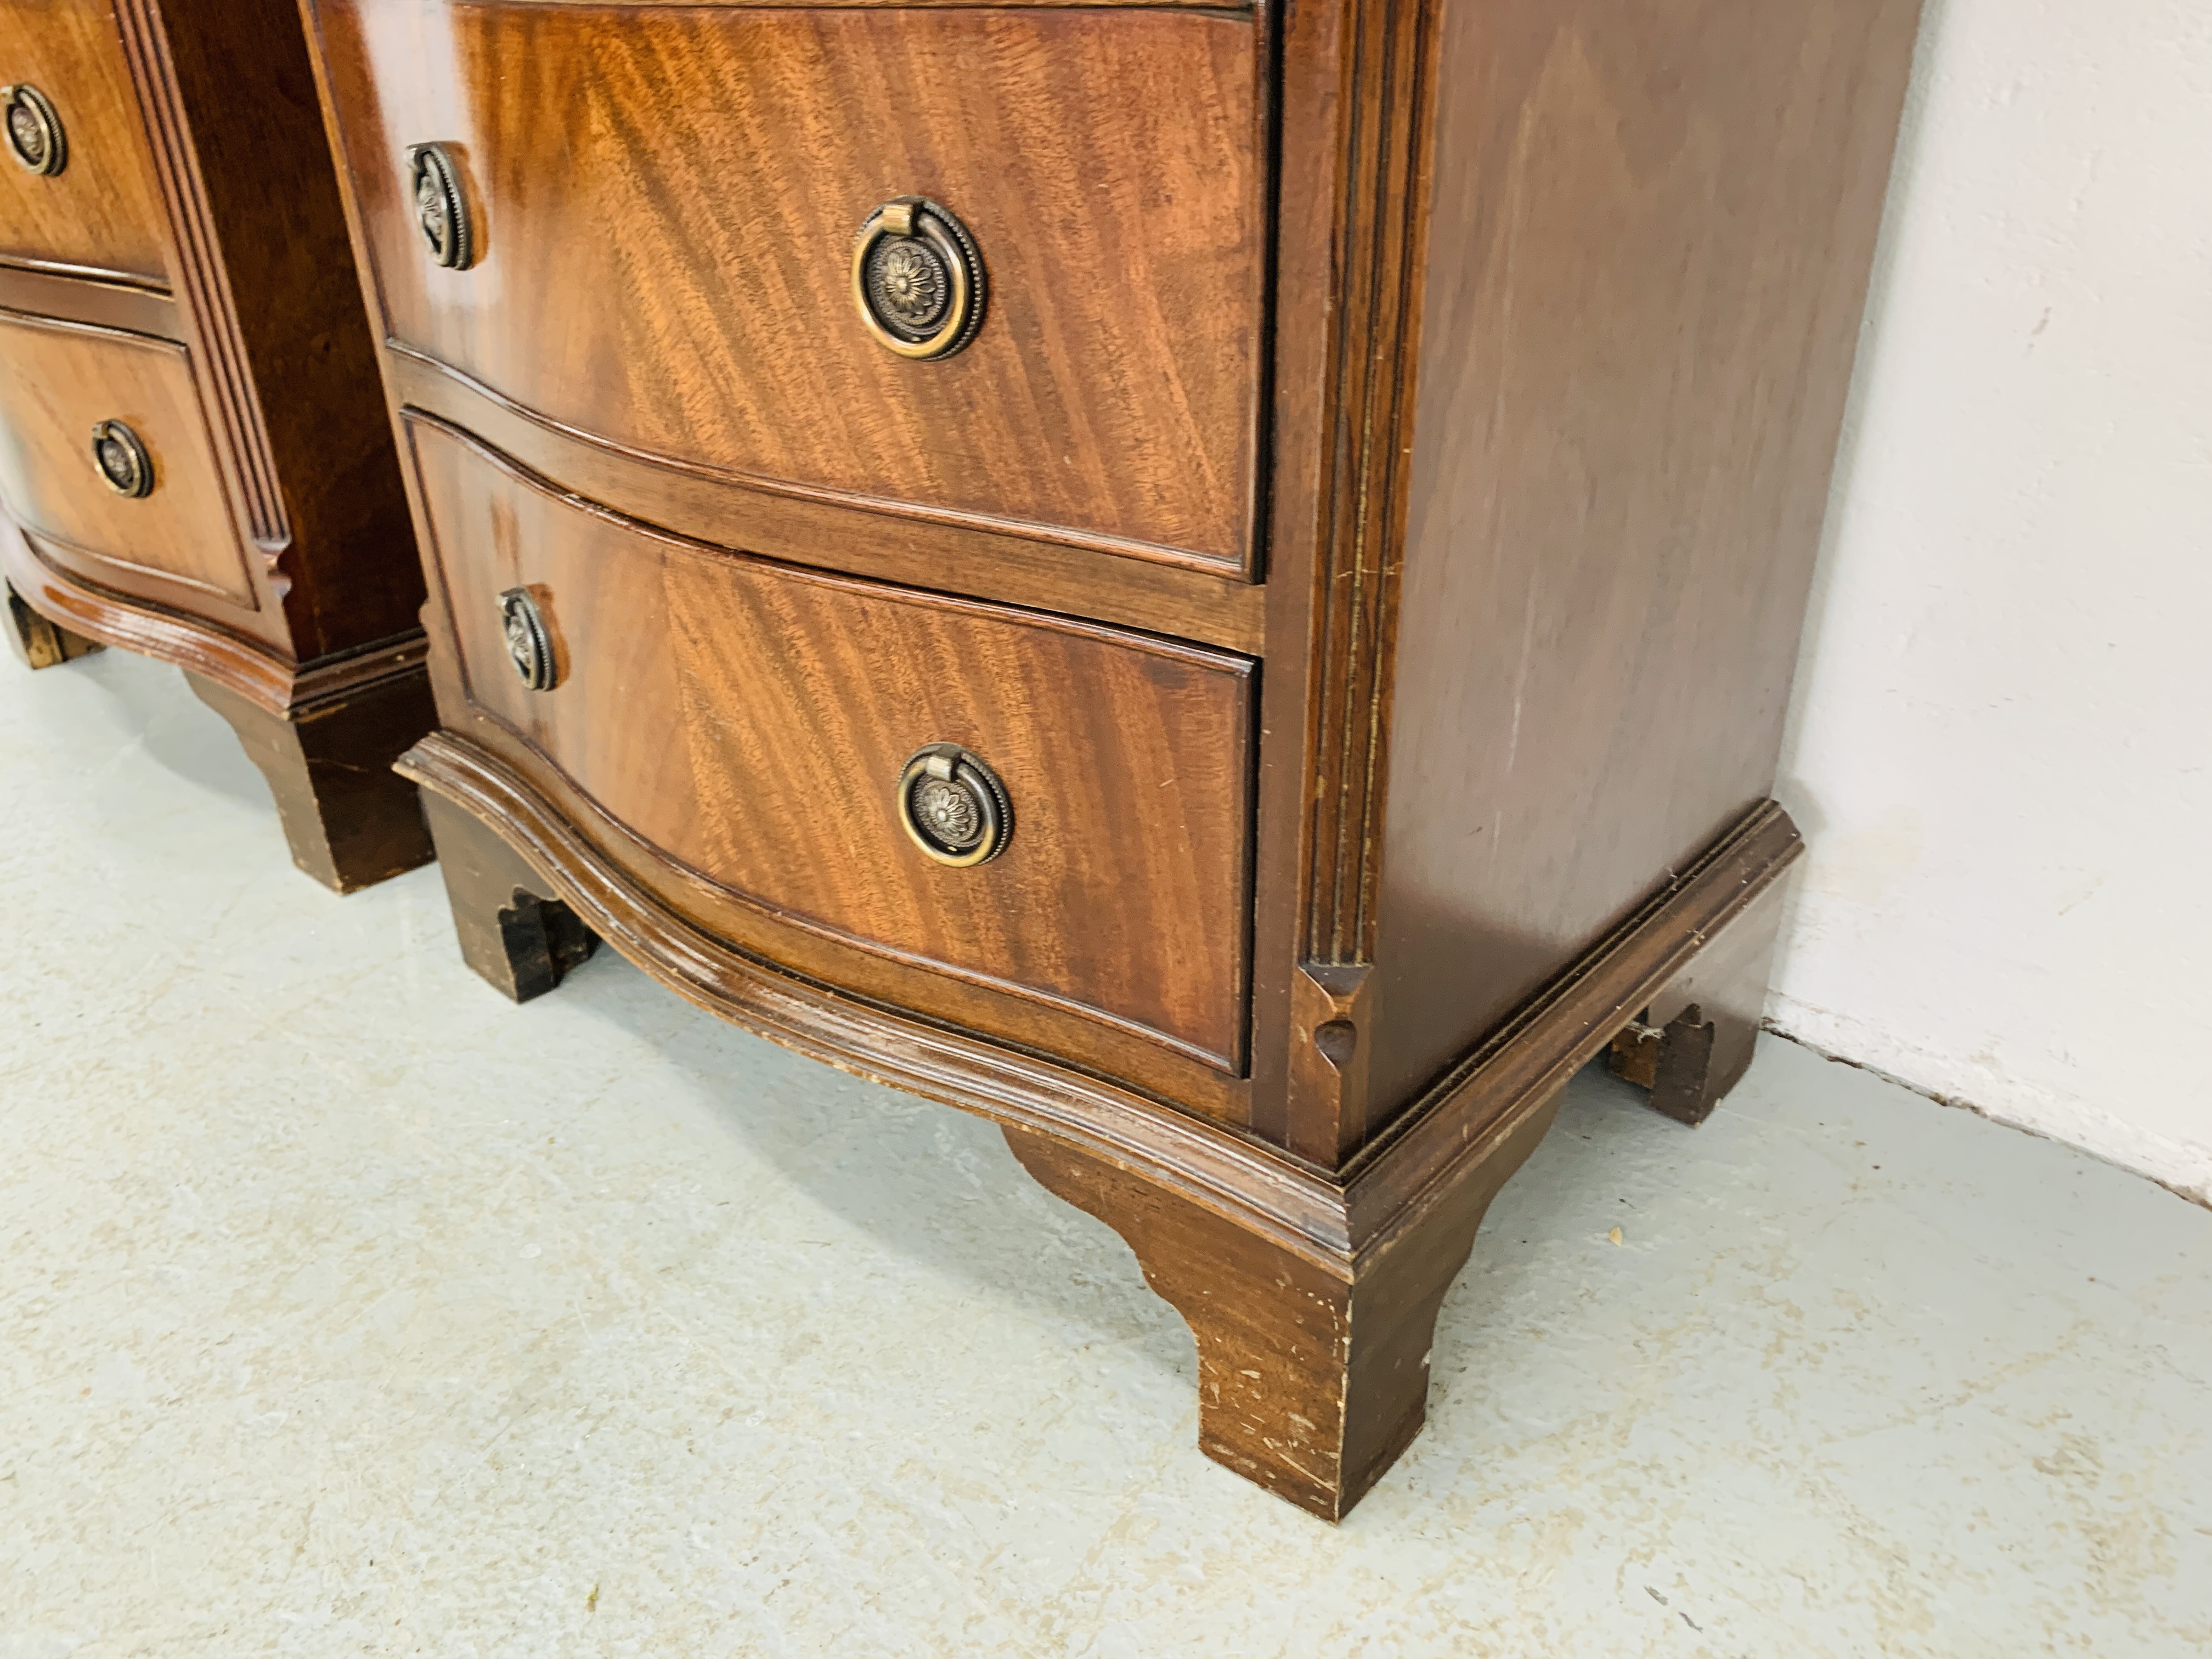 PAIR OF FLAME MAHOGANY FOUR DRAWER CHESTS - W 49CM. D 36CM. H 70CM. - Image 7 of 10